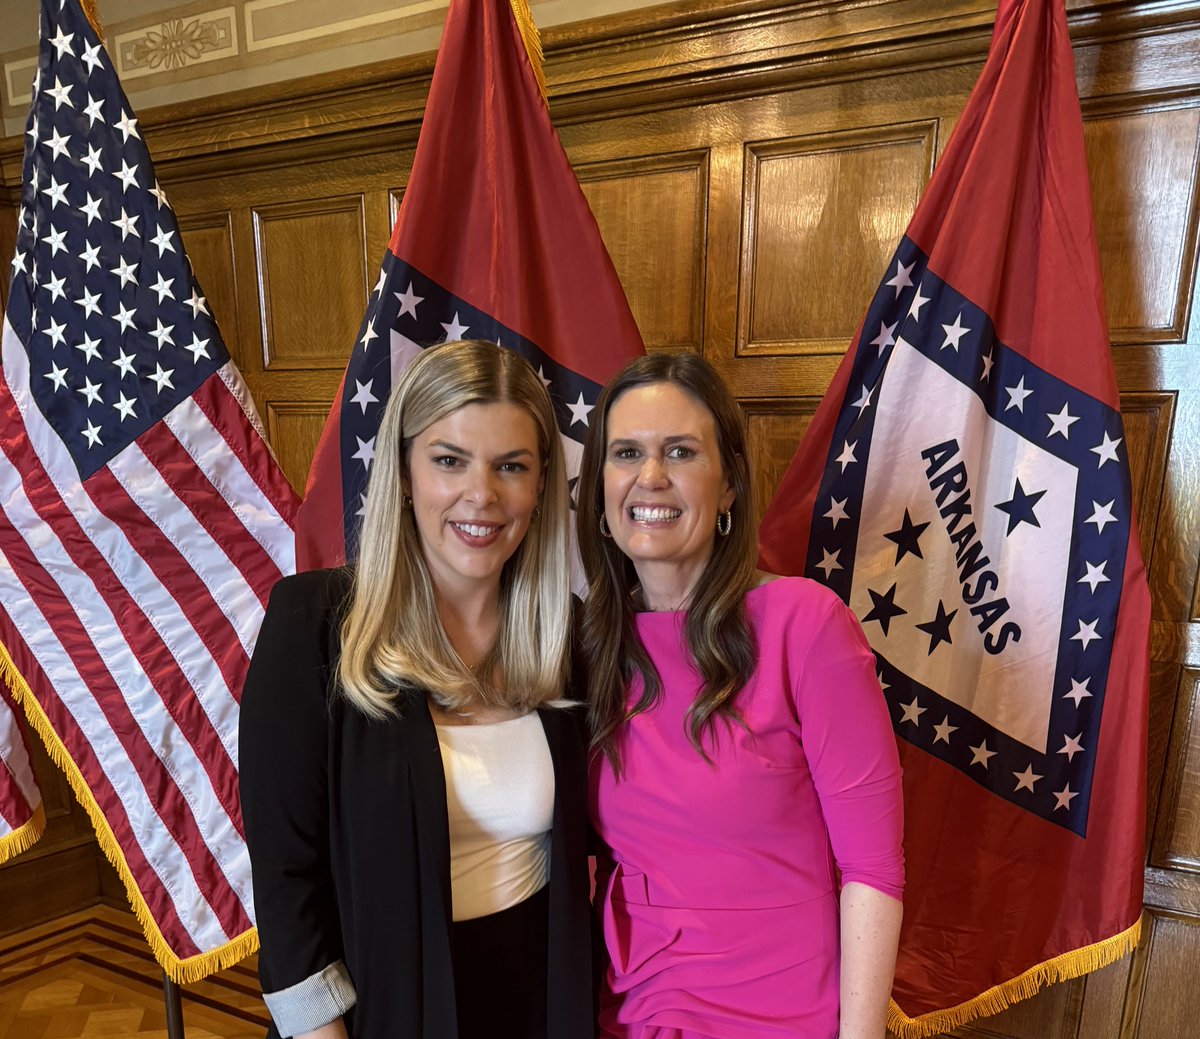 An honor to join Gov @SarahHuckabee today as she signed an EO to protect girls’ spaces and teams in the great state of Arkansas!